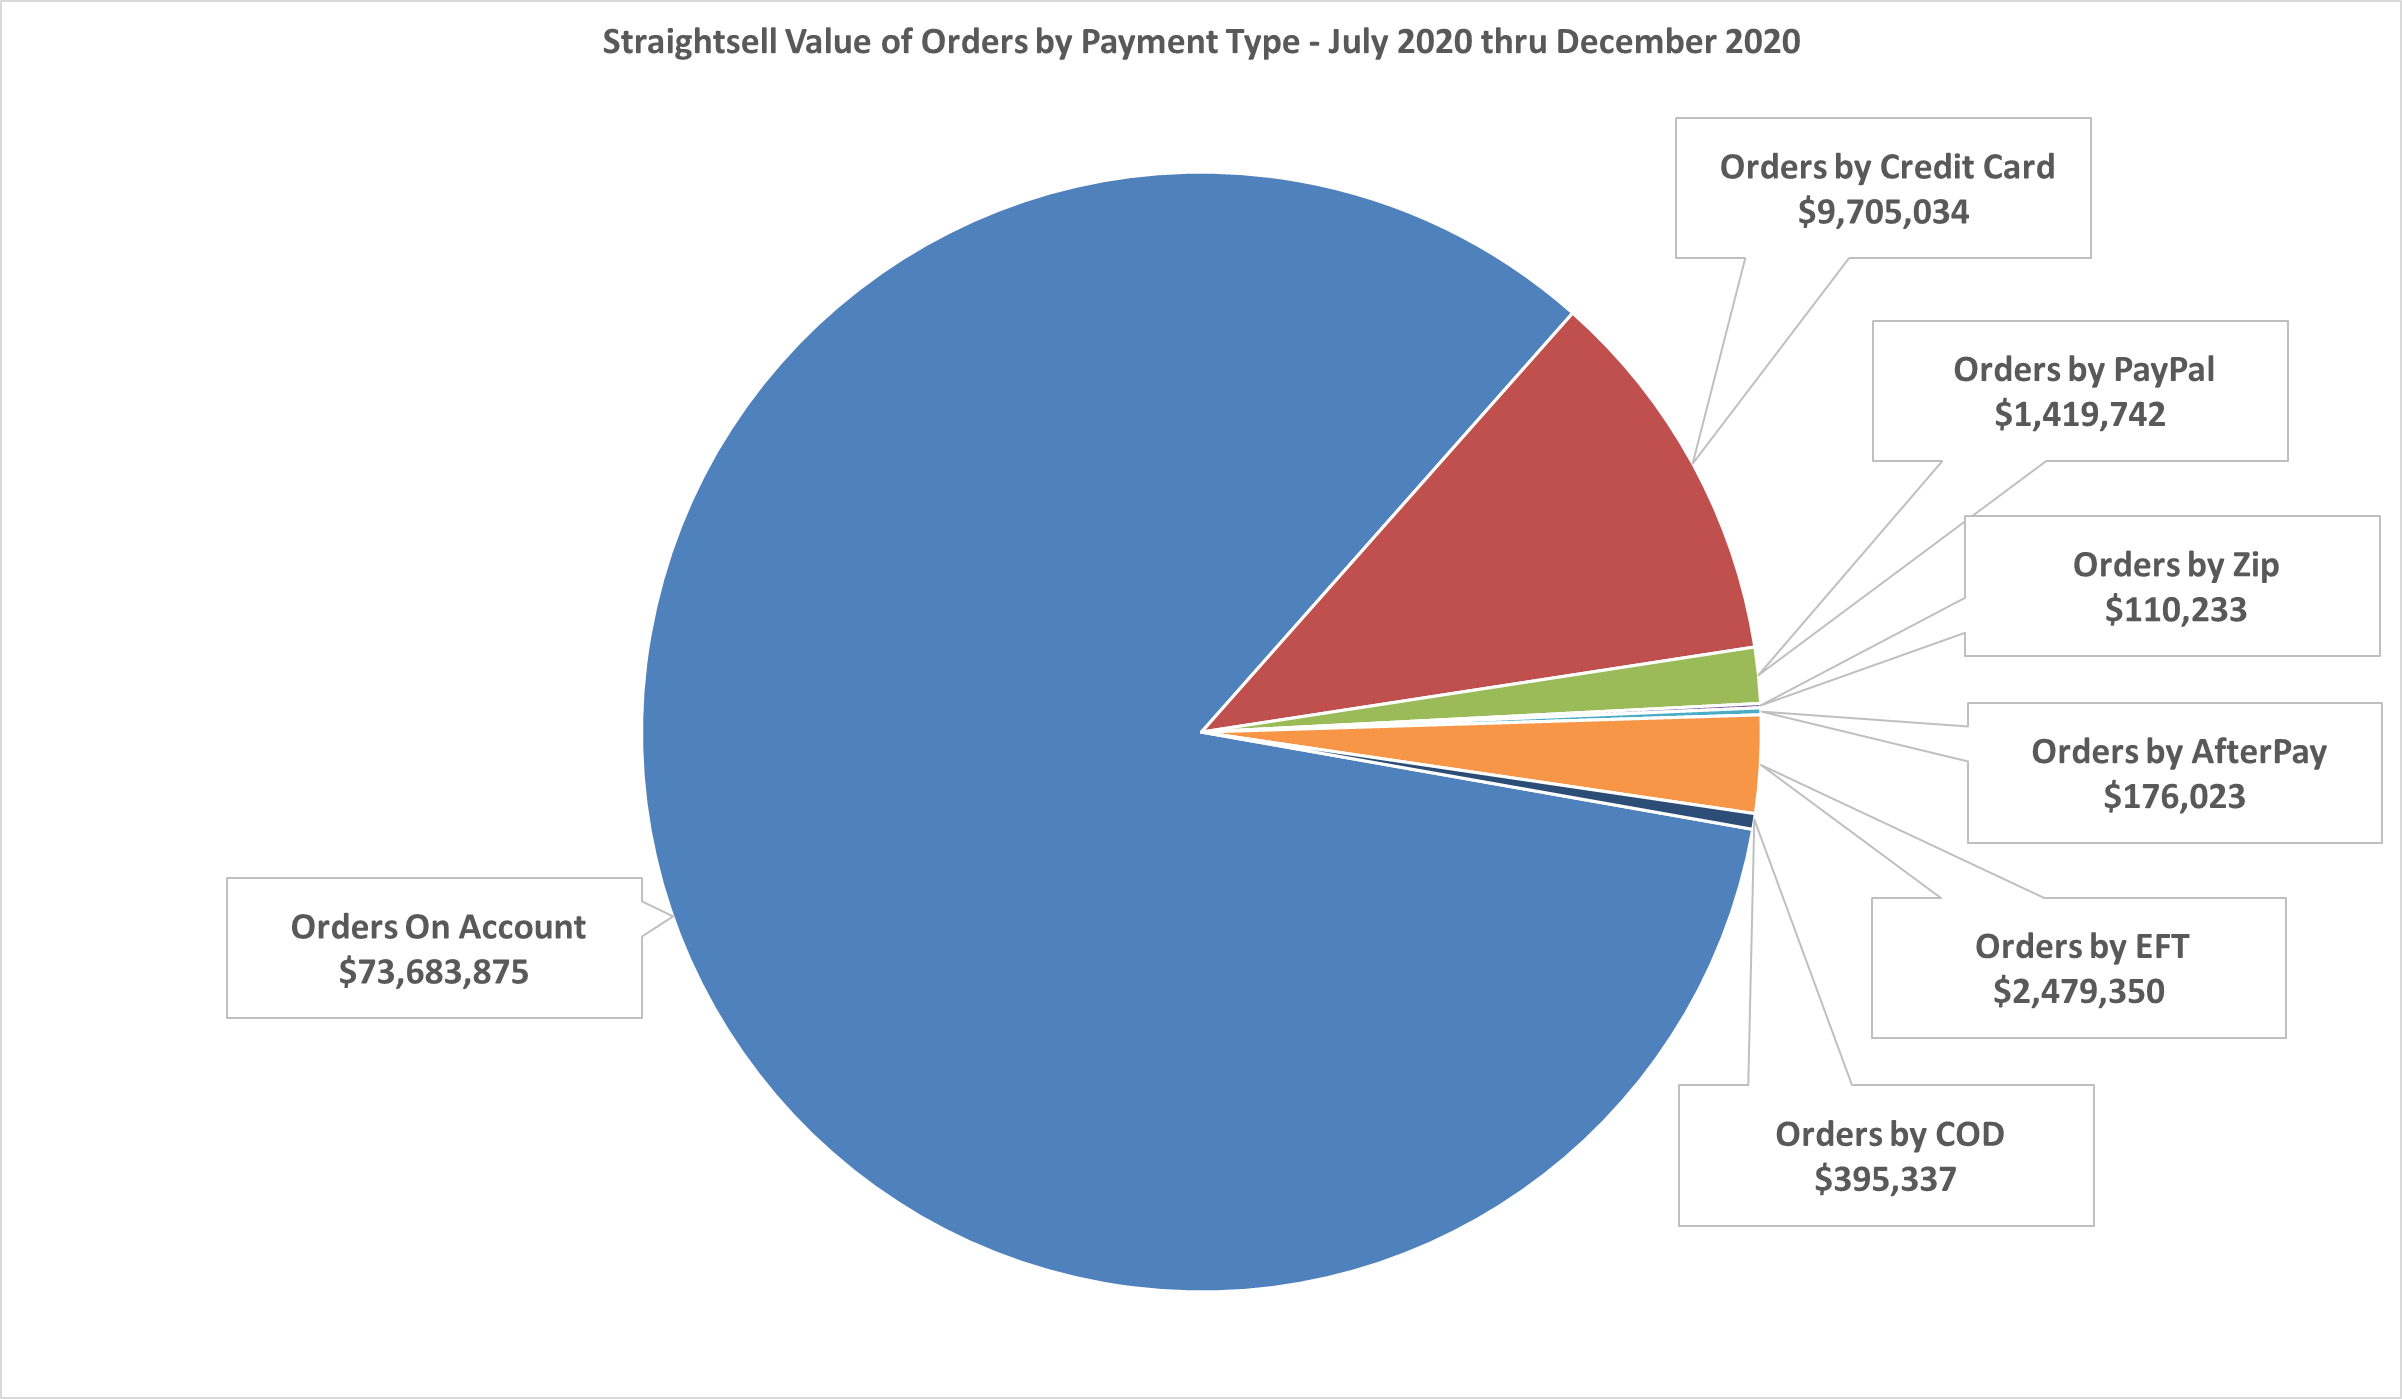 Straightsell Value of Orders by Payment Type - July 2020 thru December 2020